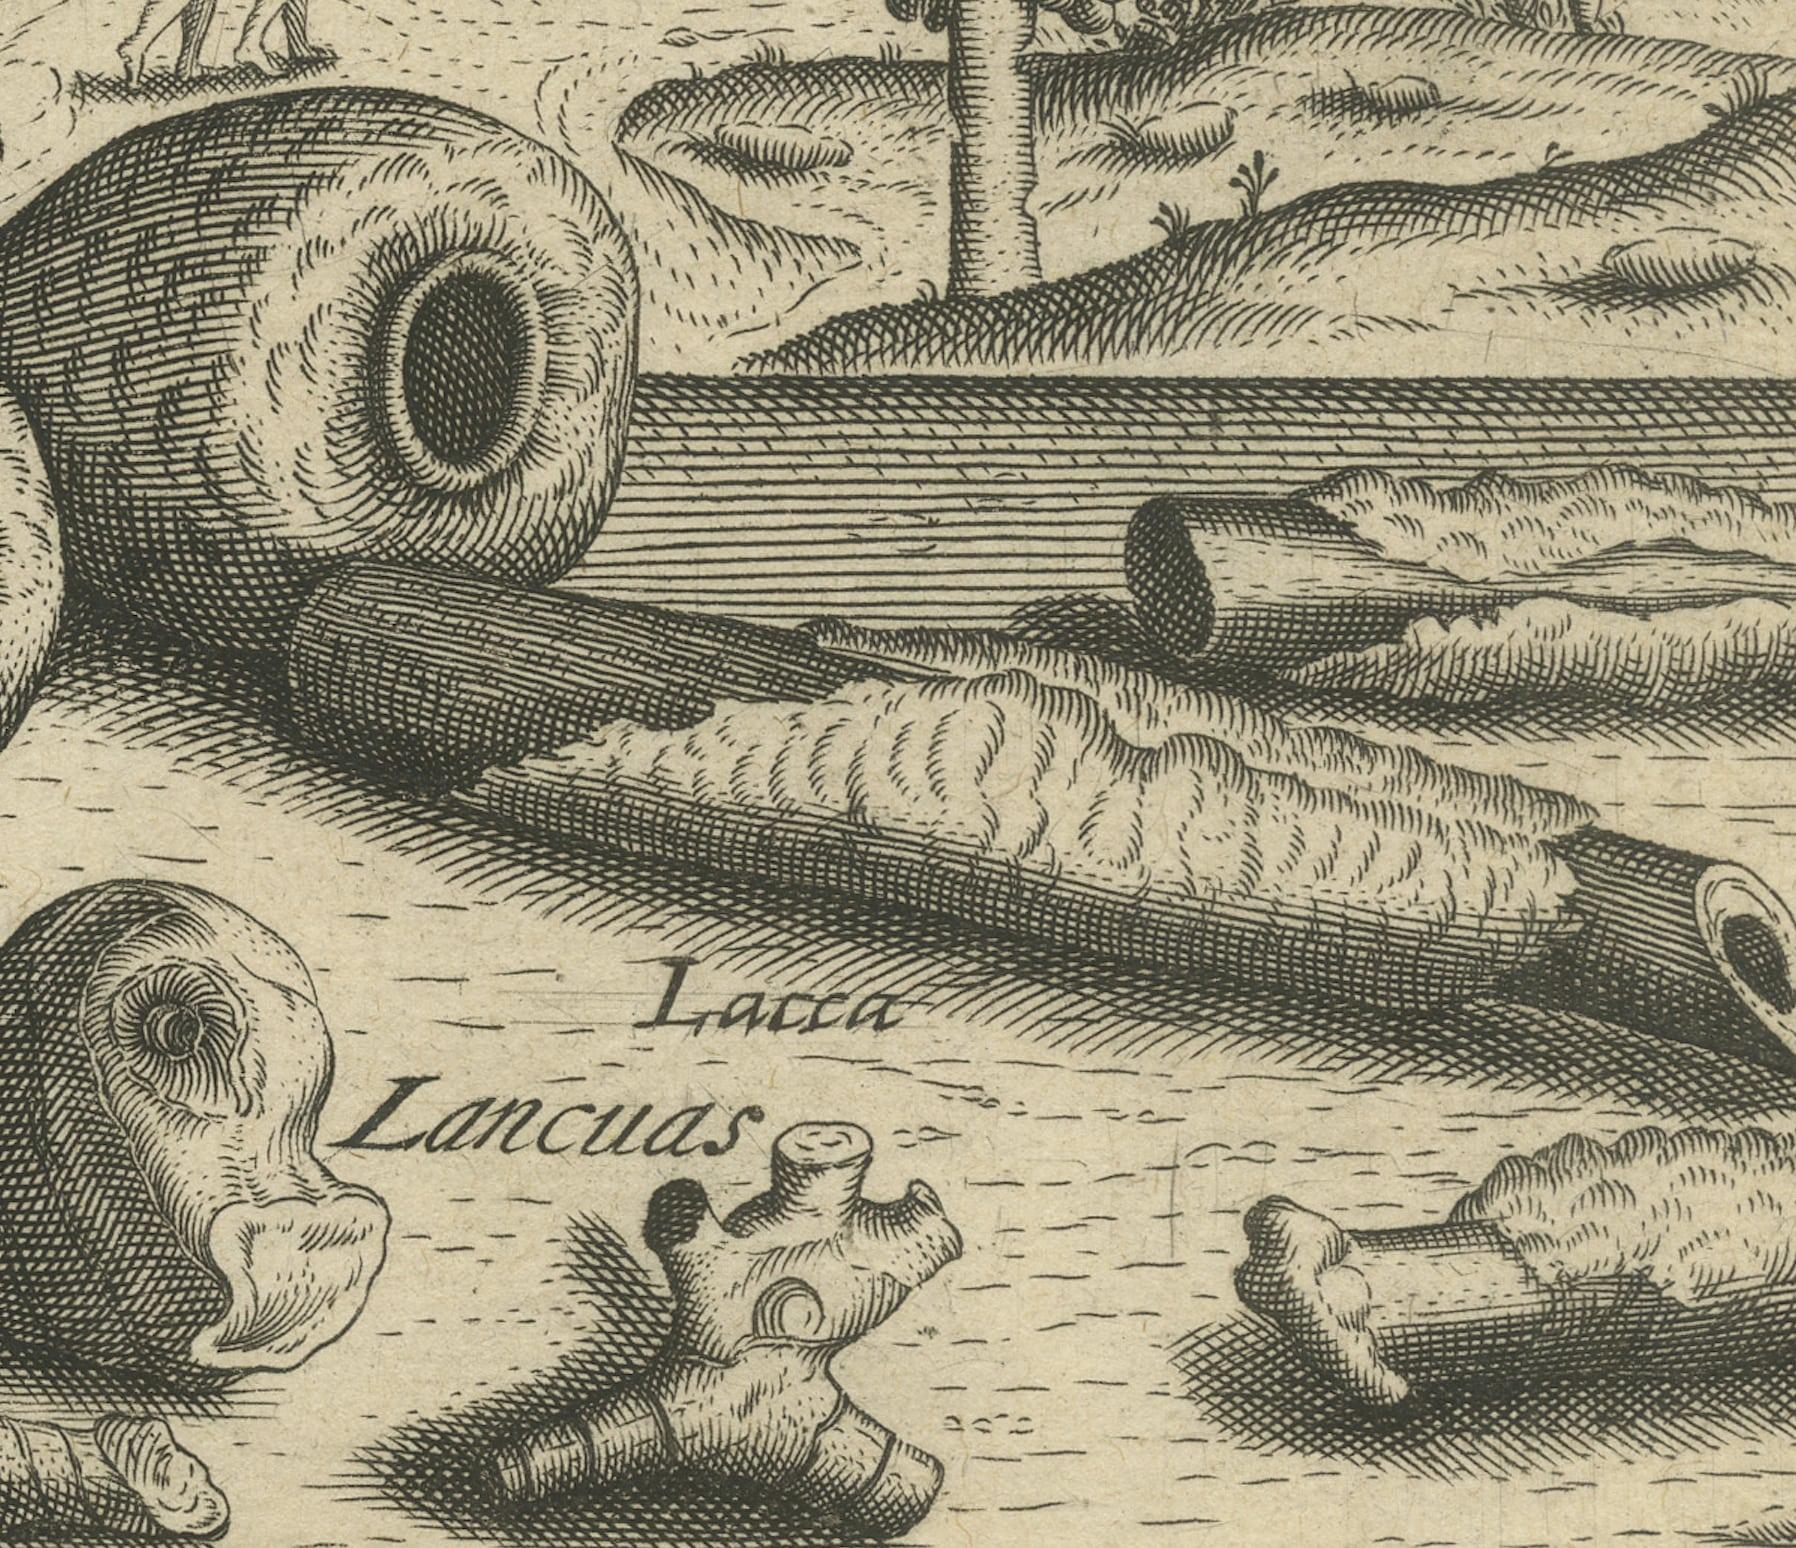 Paper Treasures of the Tropics: Lac, Lancas, and Fagaras in De Bry's 1601 Engraving For Sale